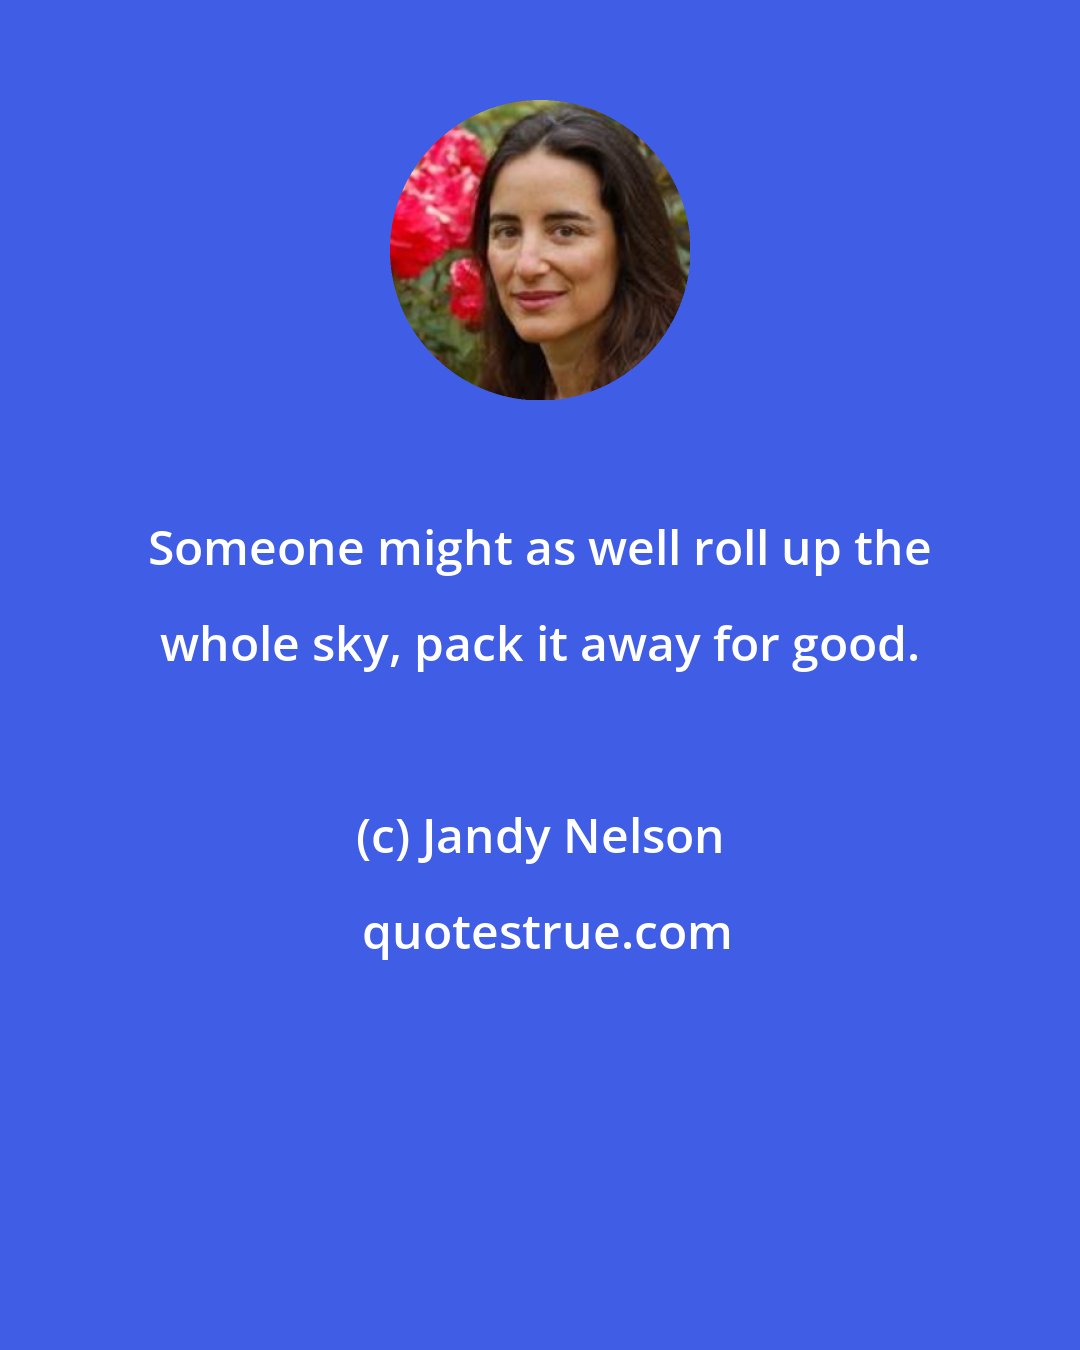 Jandy Nelson: Someone might as well roll up the whole sky, pack it away for good.